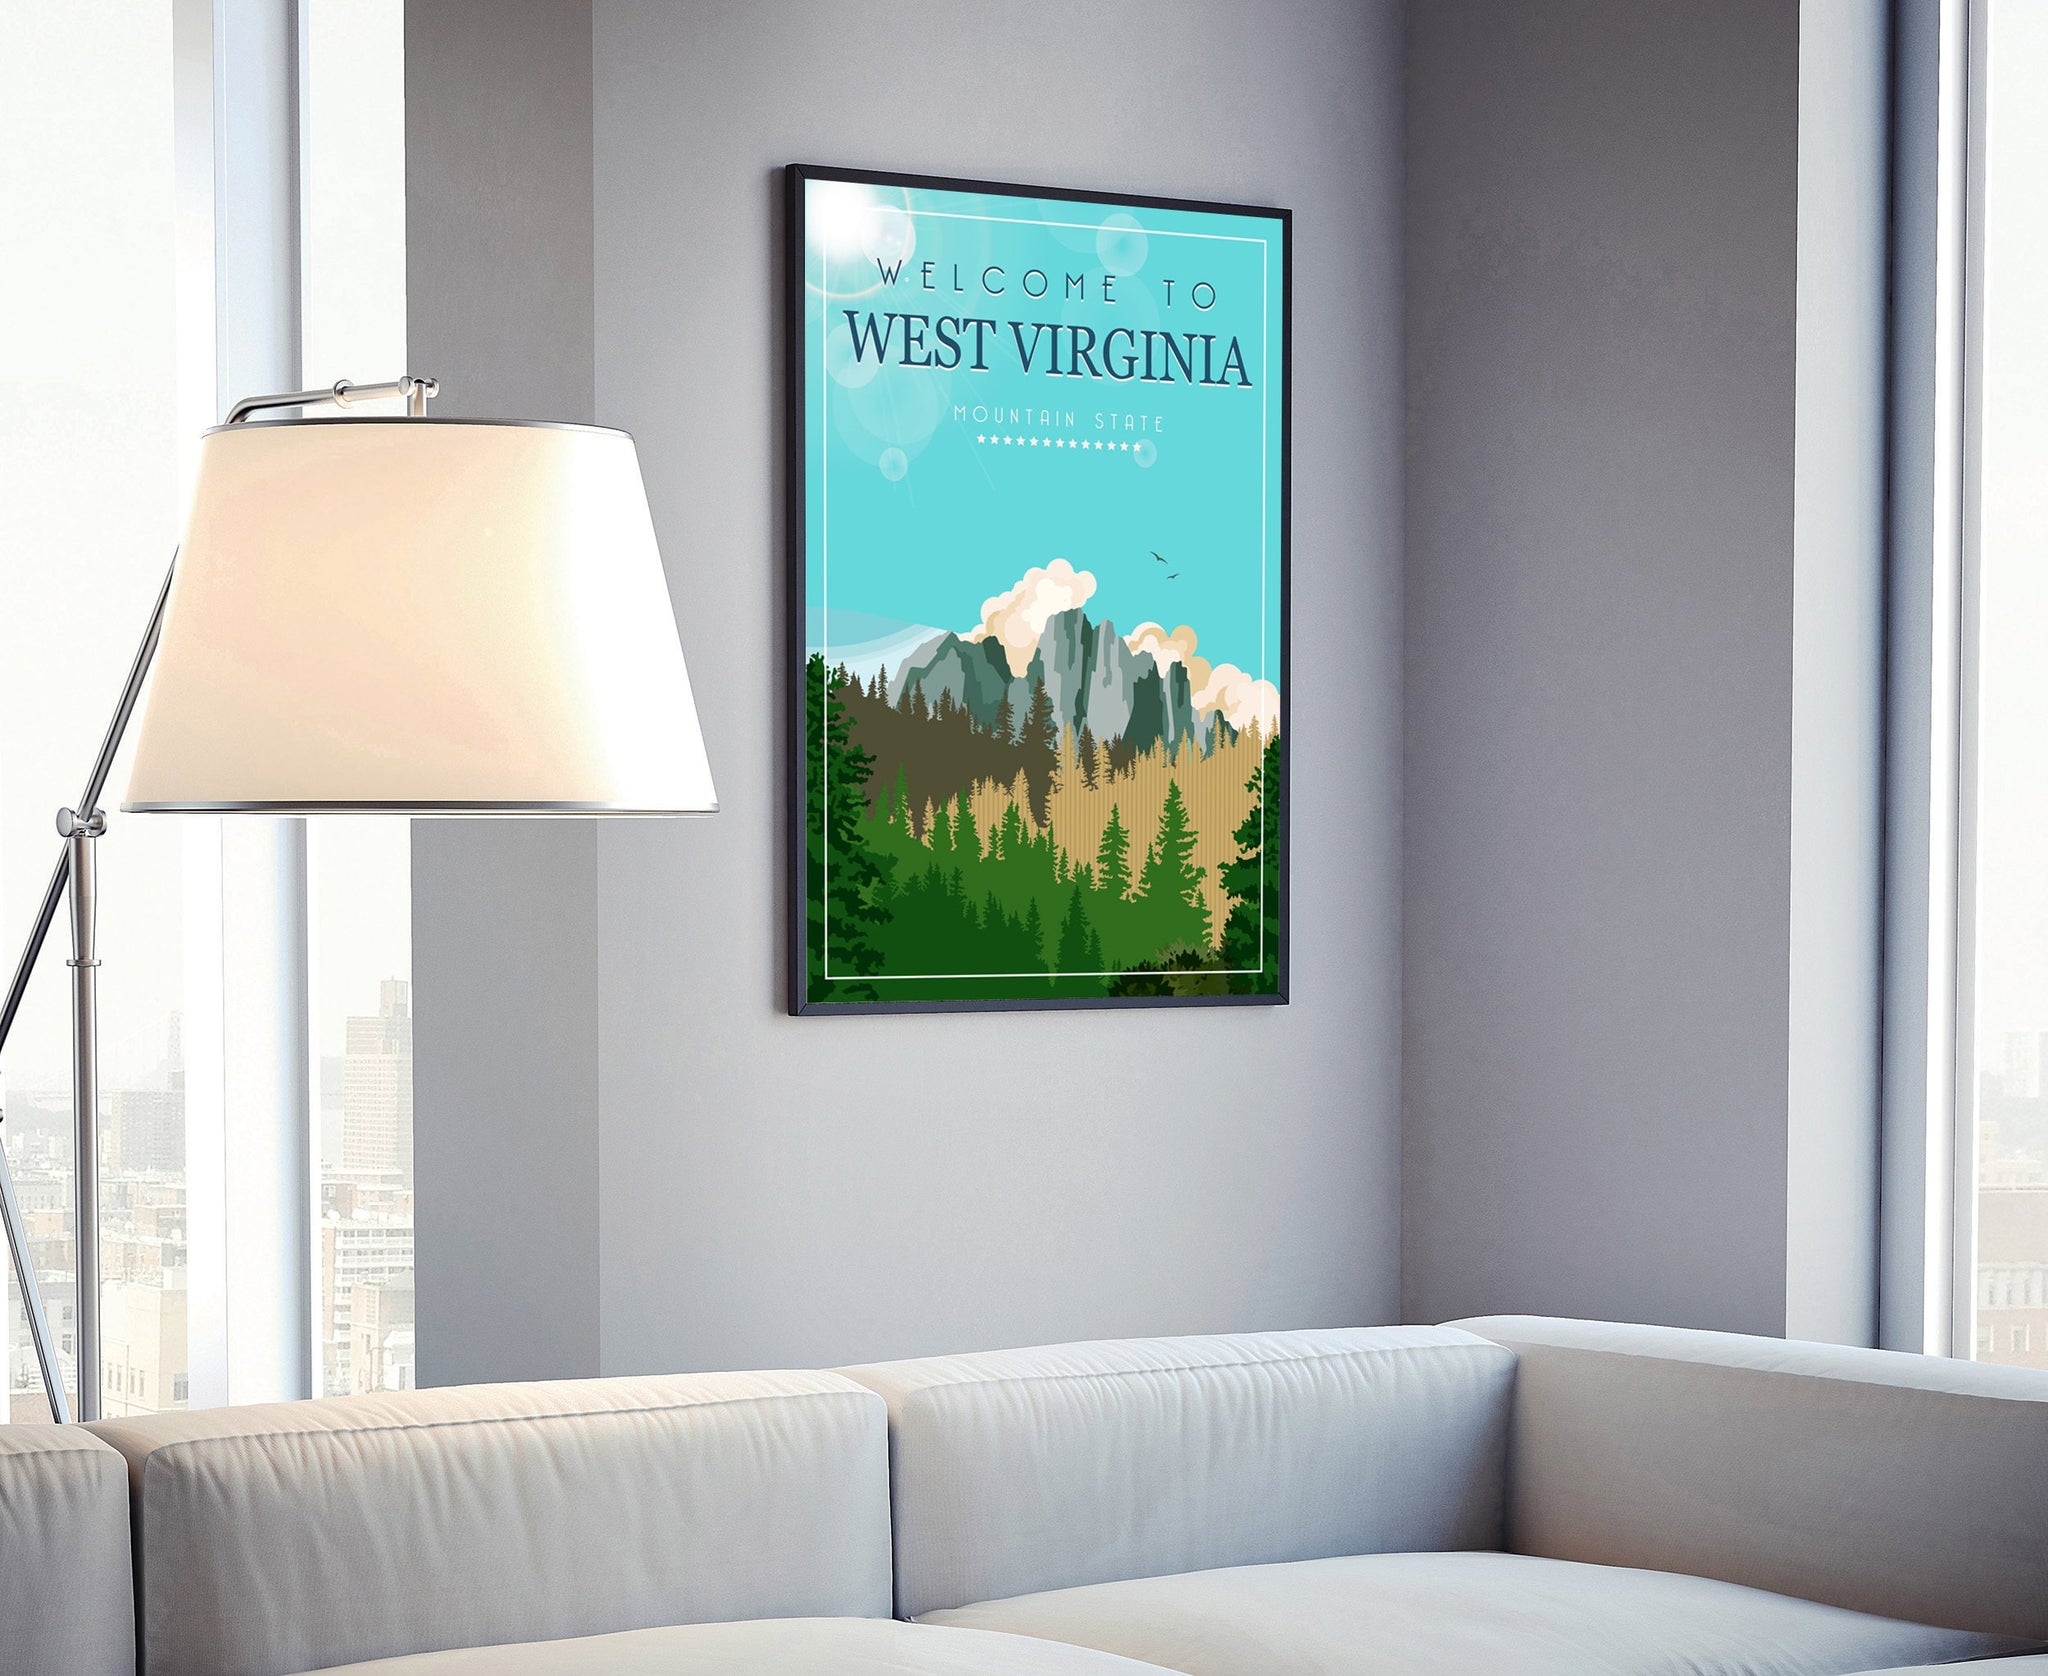 West Virginia Vintage Rustic Poster Print, Retro Style Travel Poster